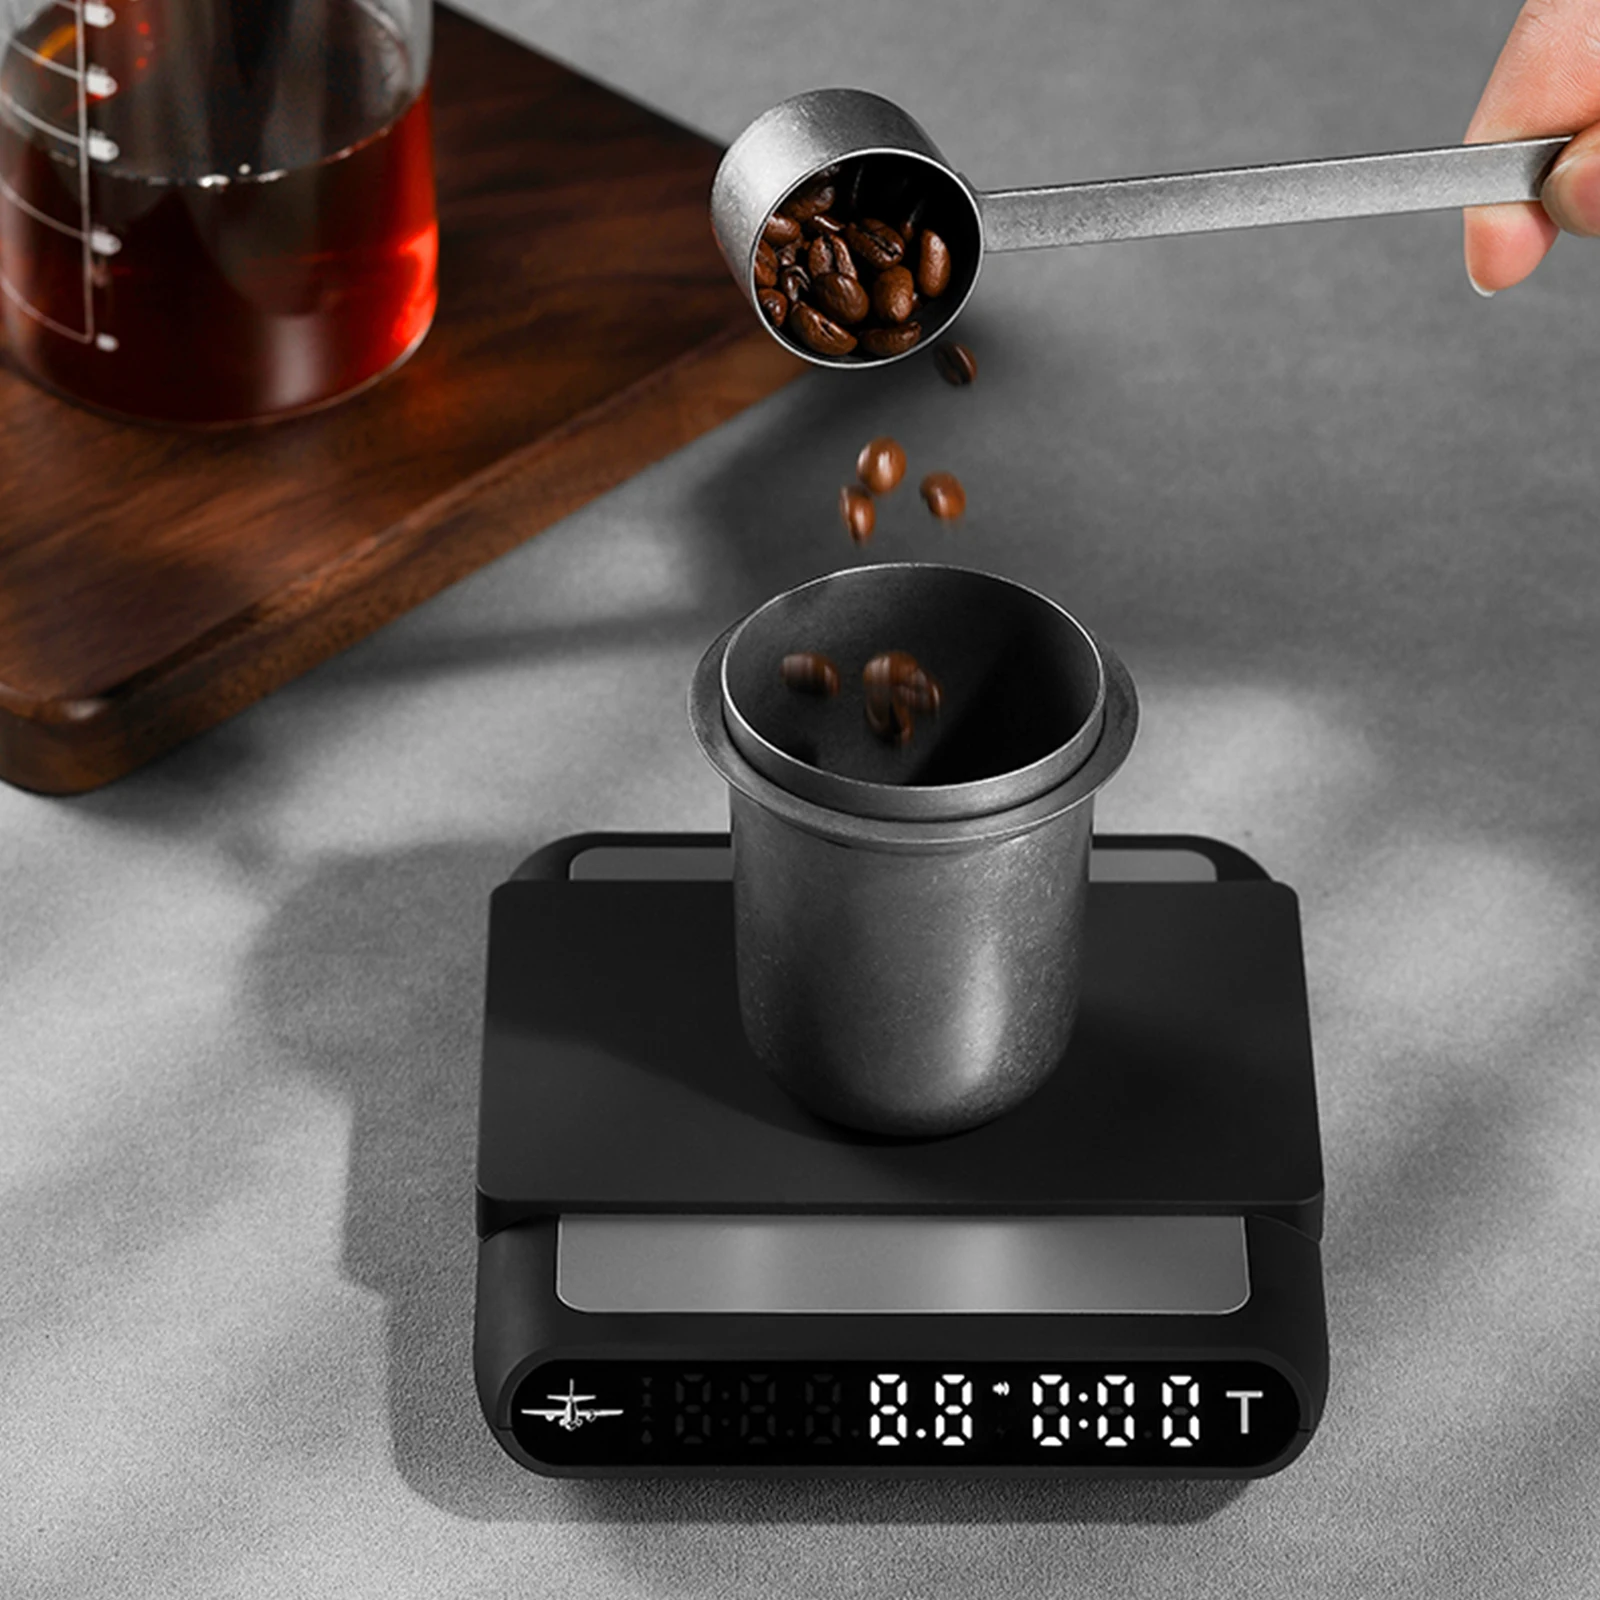 MHW-3BOMBER Smart Drip Espresso Coffee Scale with Auto Timer USB Charging Kitchen Electronic Scale Cafe Home Barista Accessories images - 6